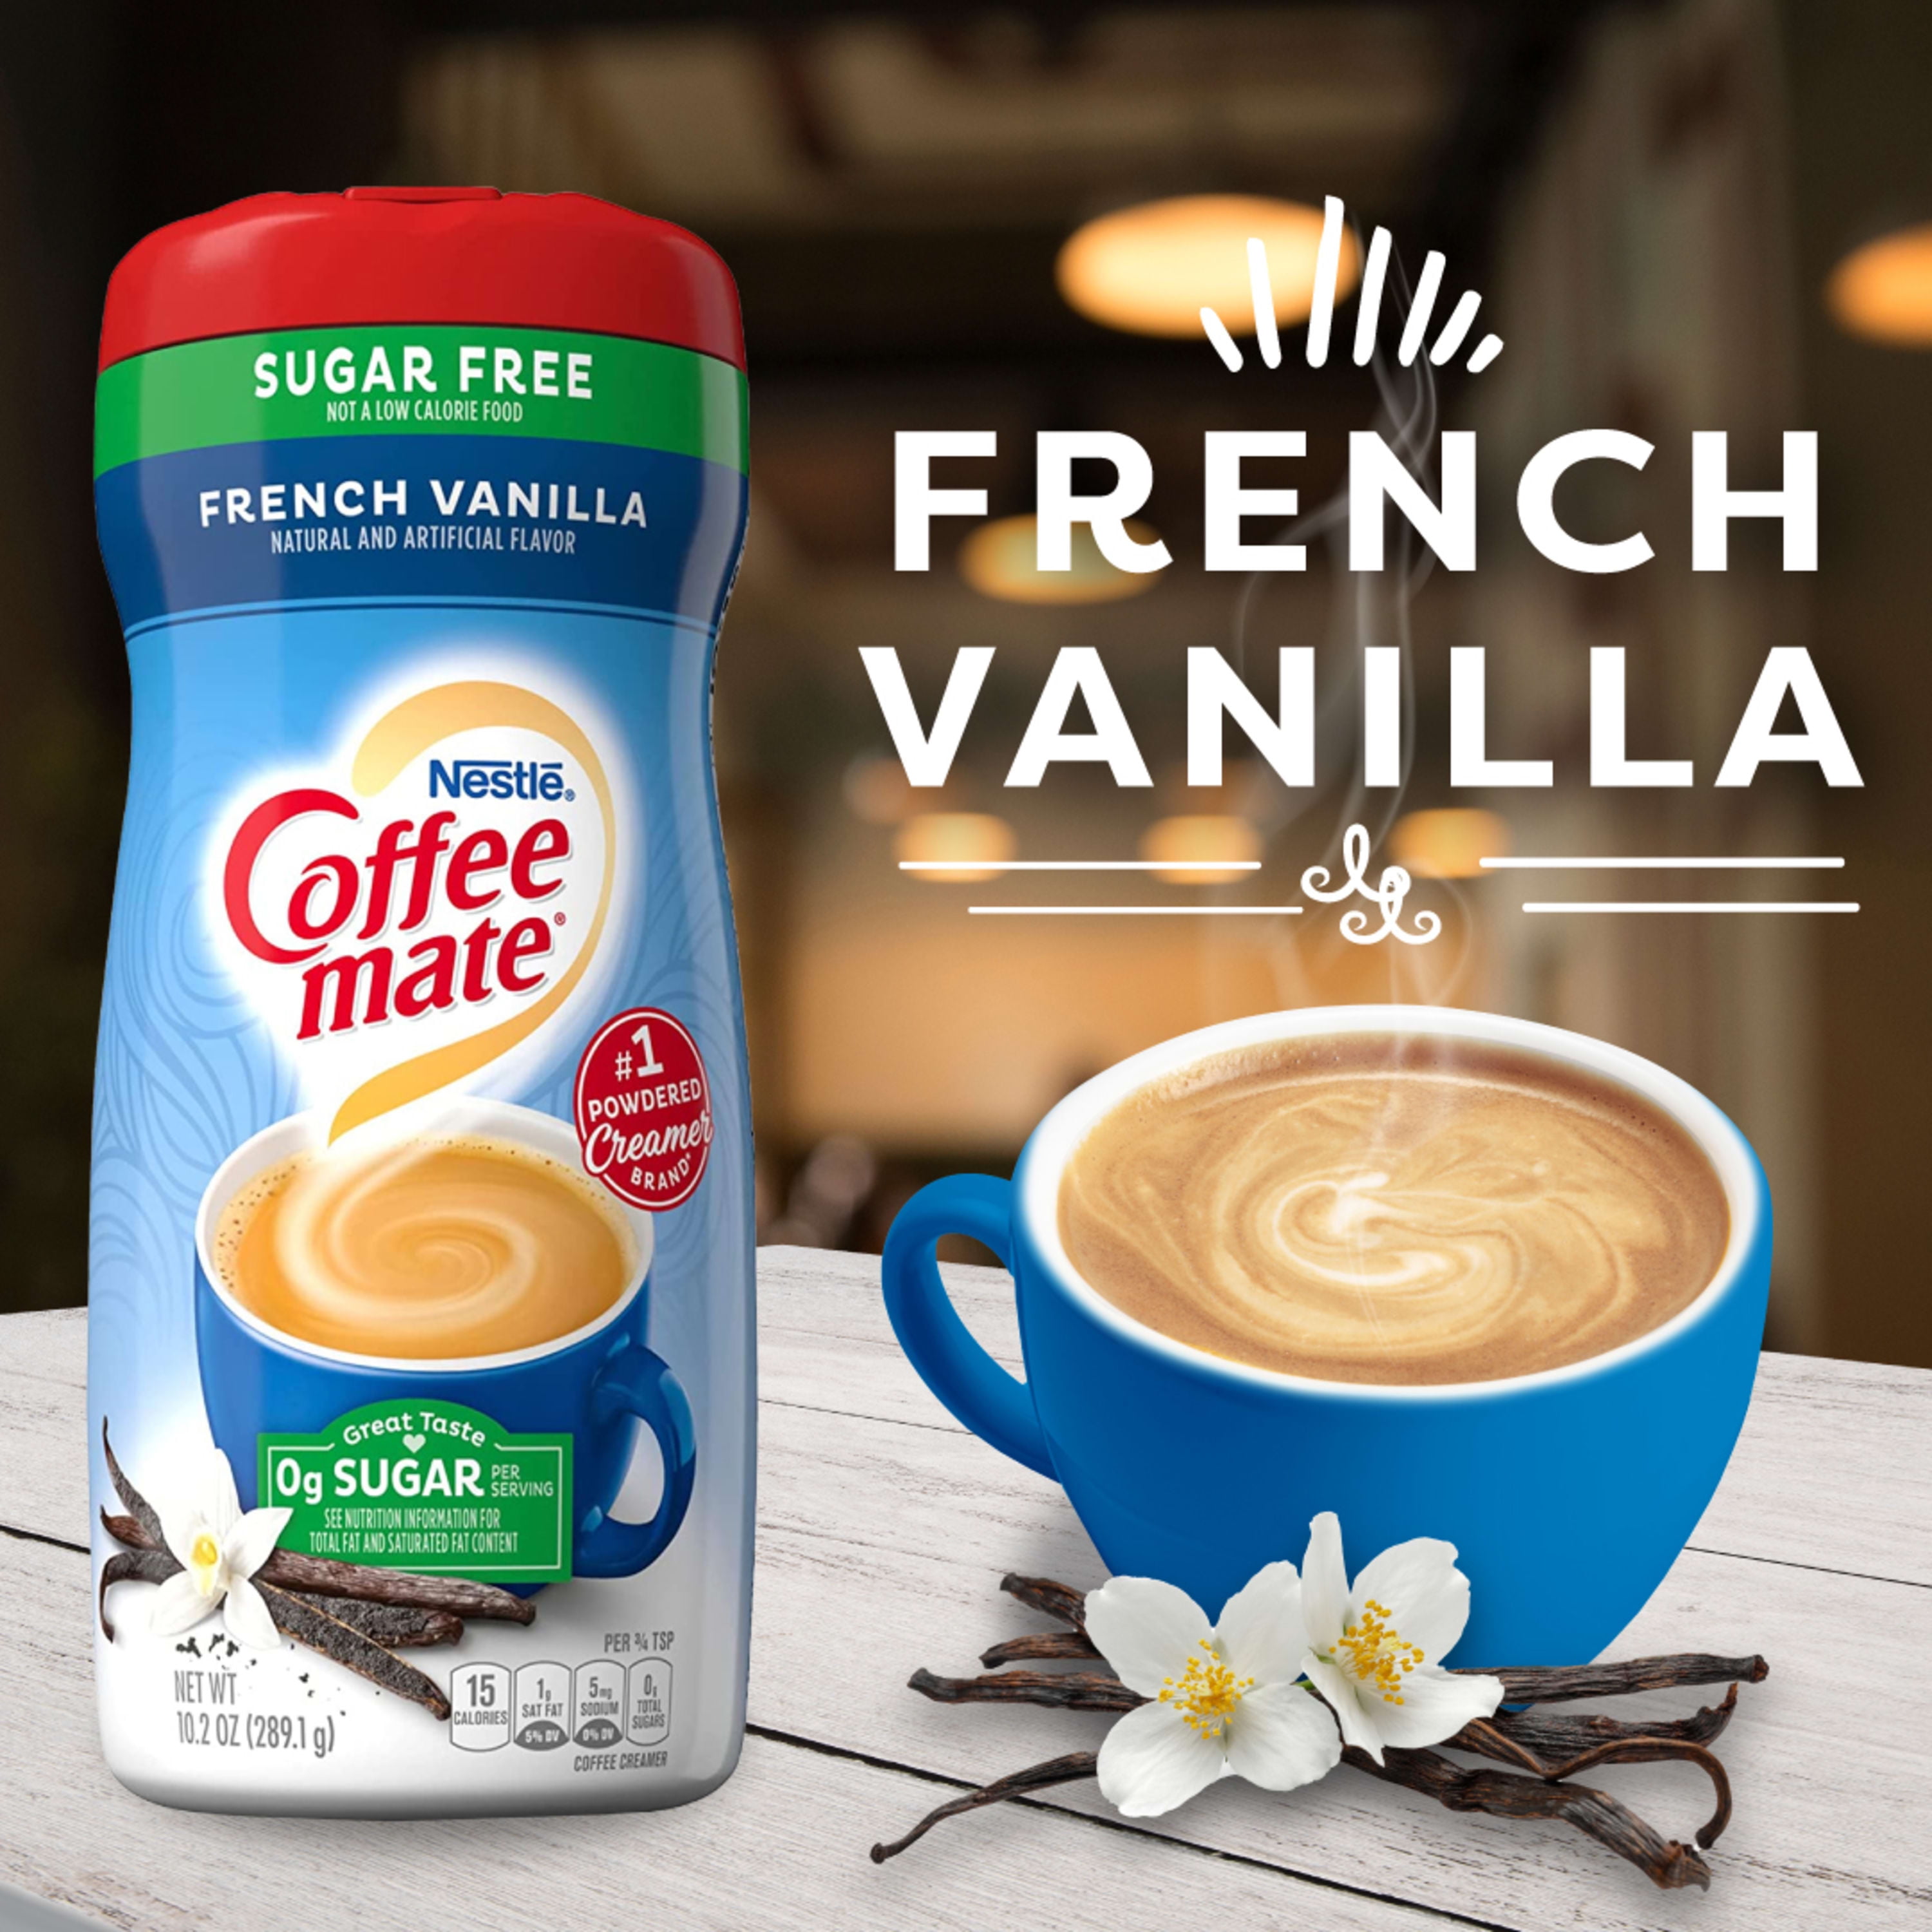 Finally, An All-Natural Powdered Coffee Creamer That Curbs Your